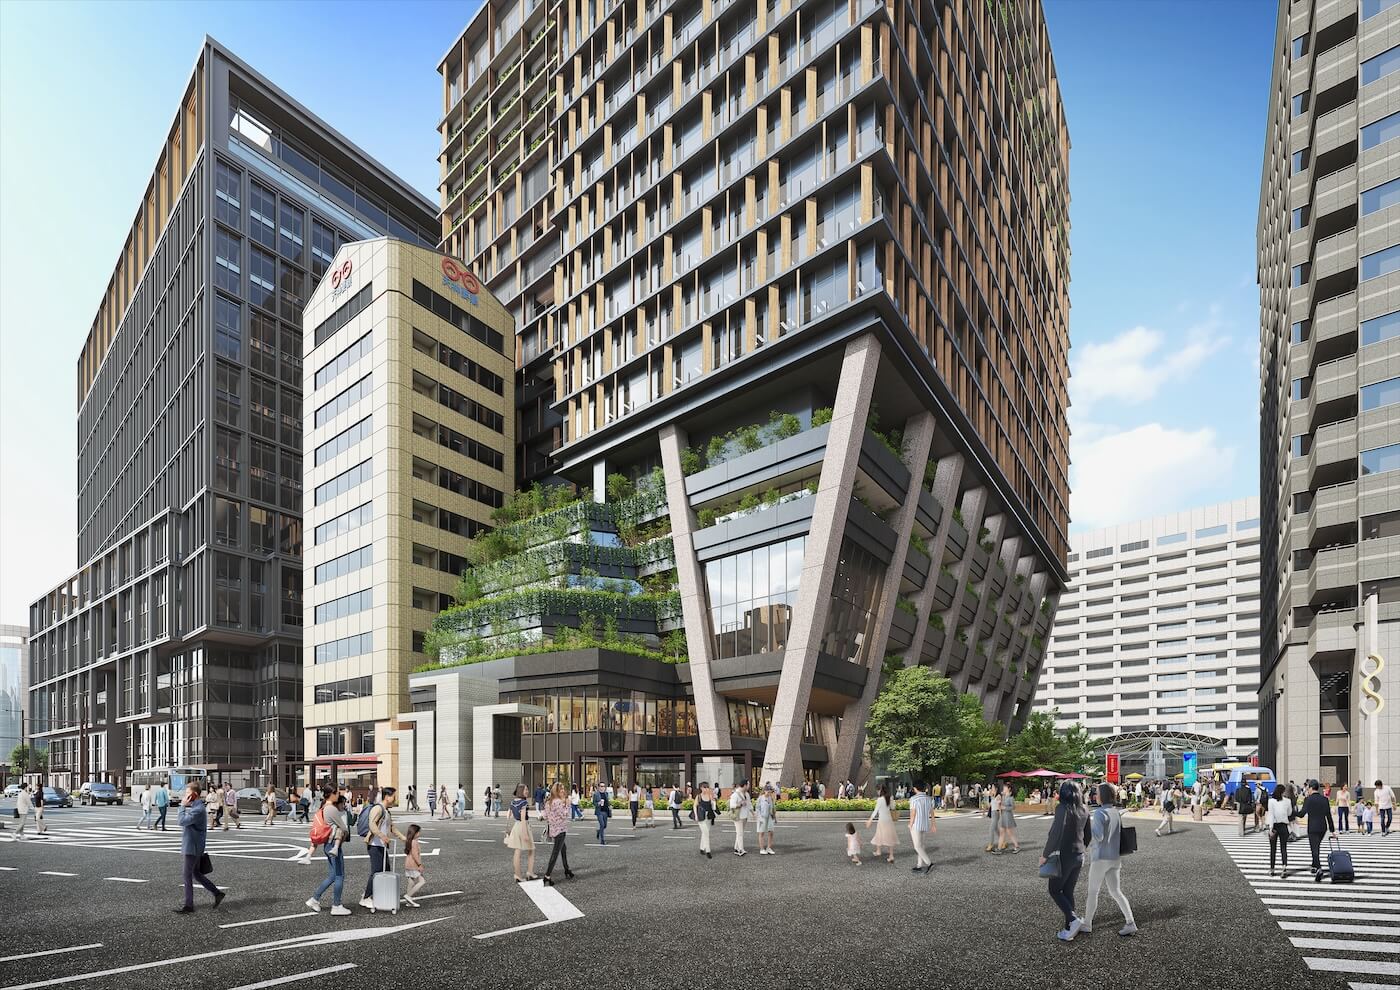 Construction Begins on New IMS Site Project, Ace Hotel as Anchor Tenant, IMS跡地「（仮称）天神1-7計画」新築工事着工